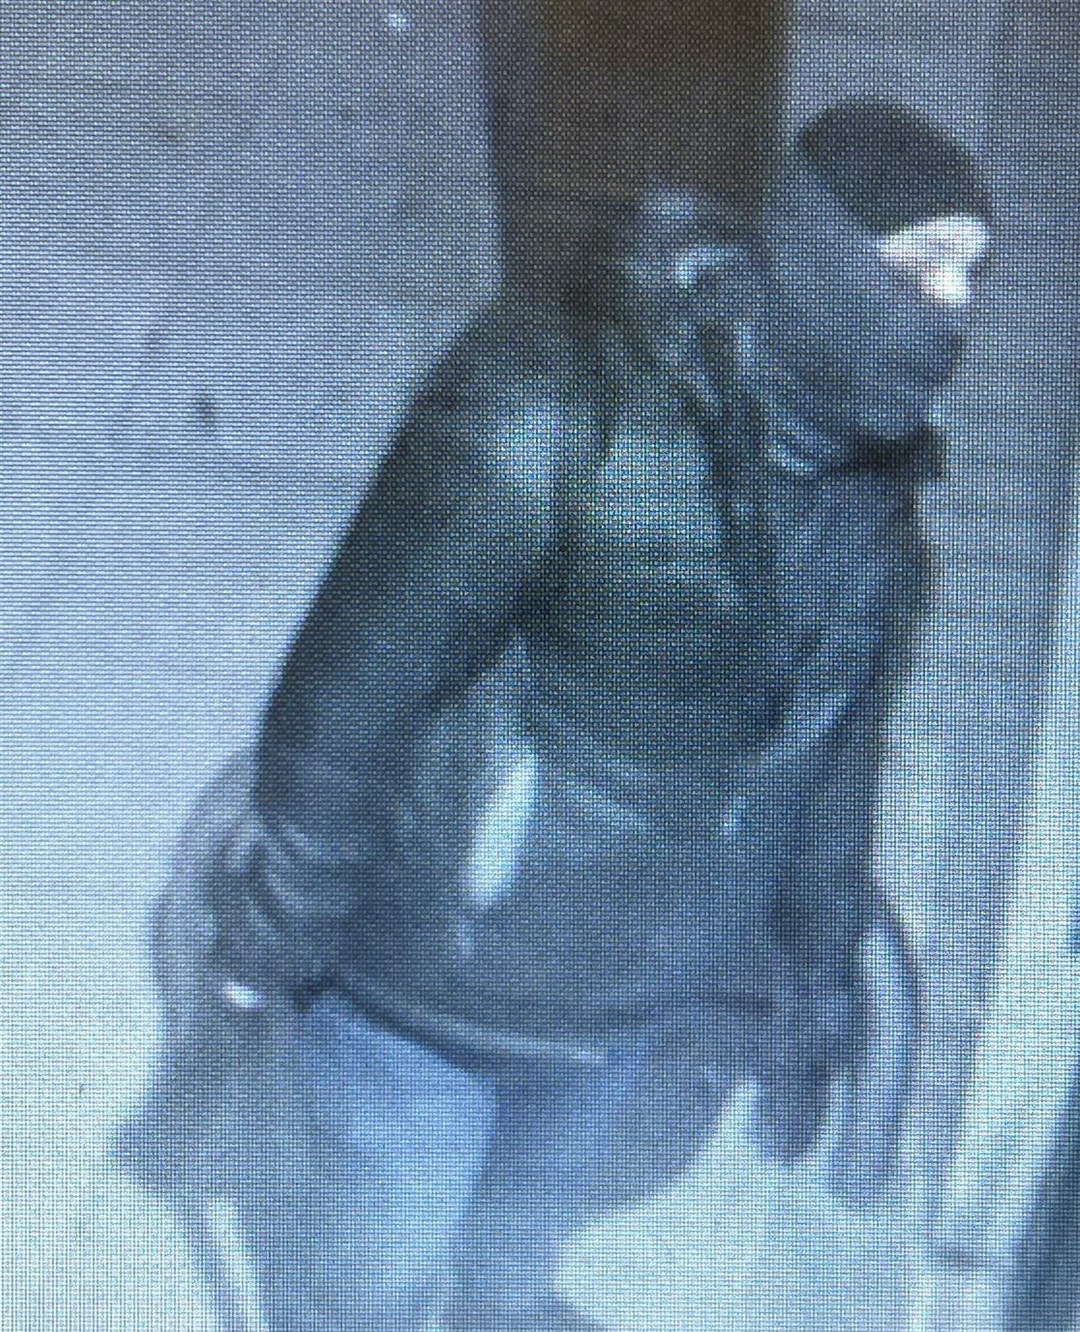 Police believe the man in the CCTV images may be able to help with their investigation.